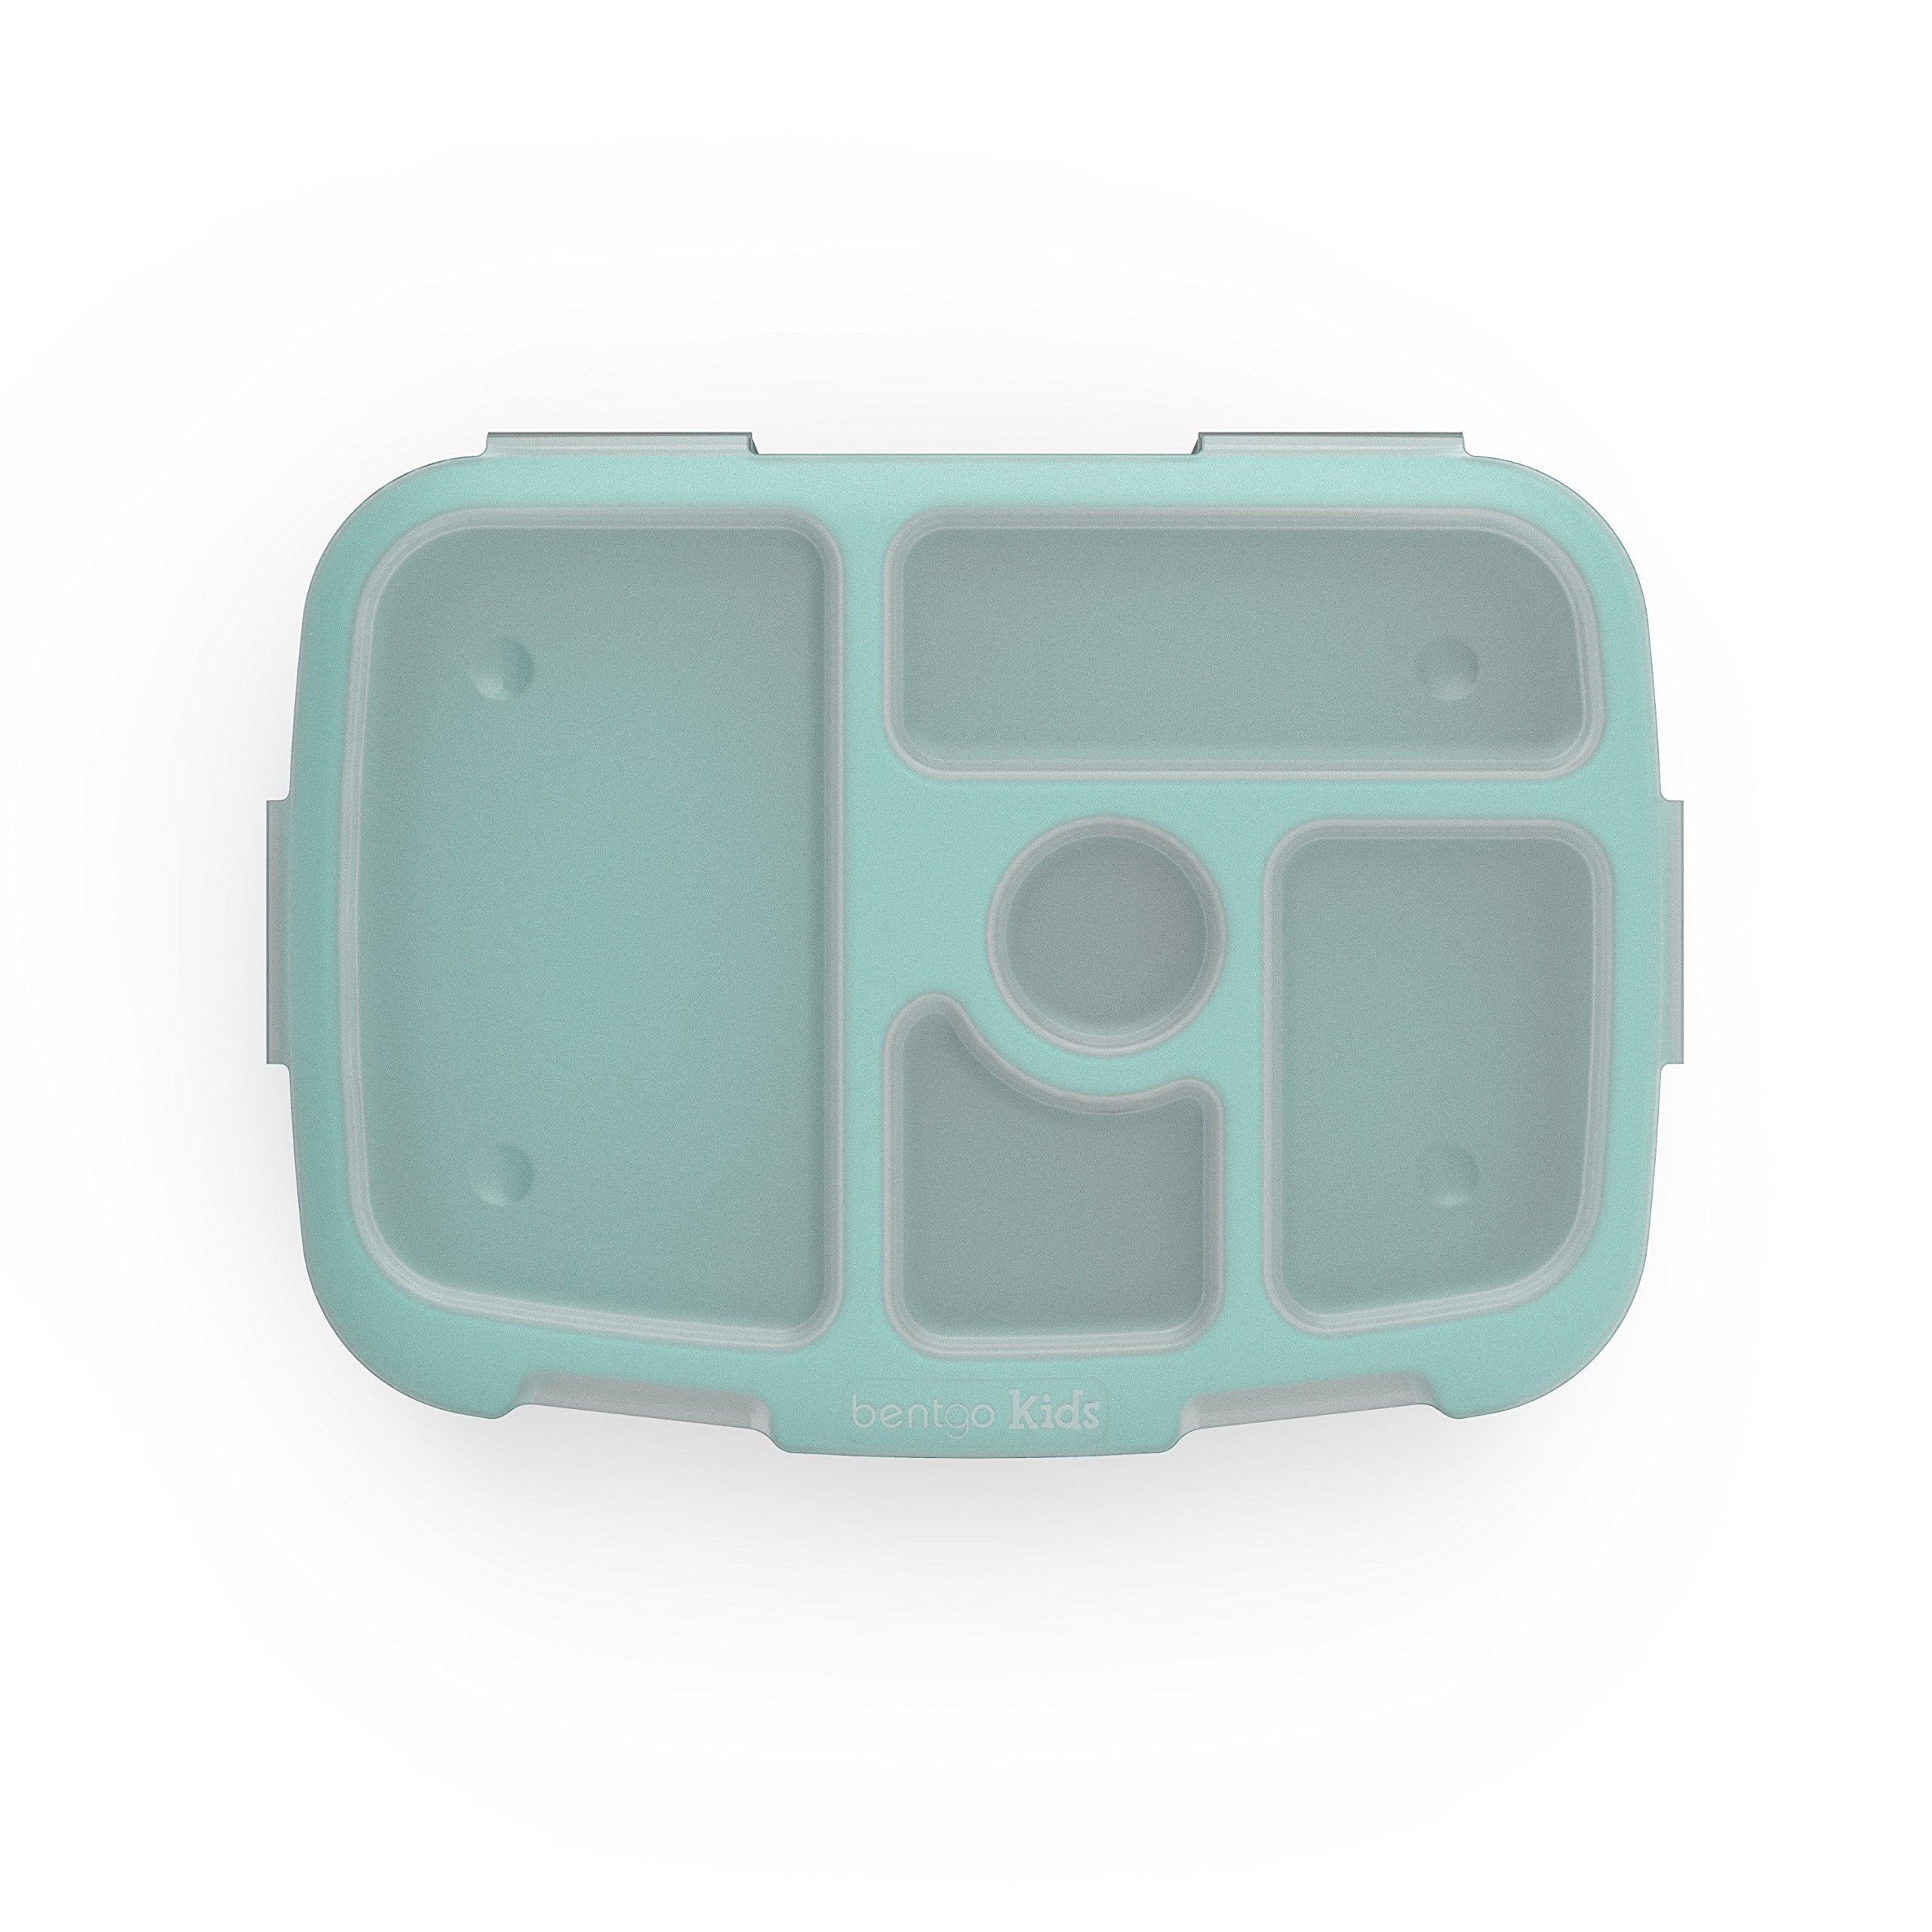 Bentgo Fresh Tray (Aqua) with Transparent Cover - Reusable, BPA-Free, 4-Compartment Meal Prep Container with Built-in Portion